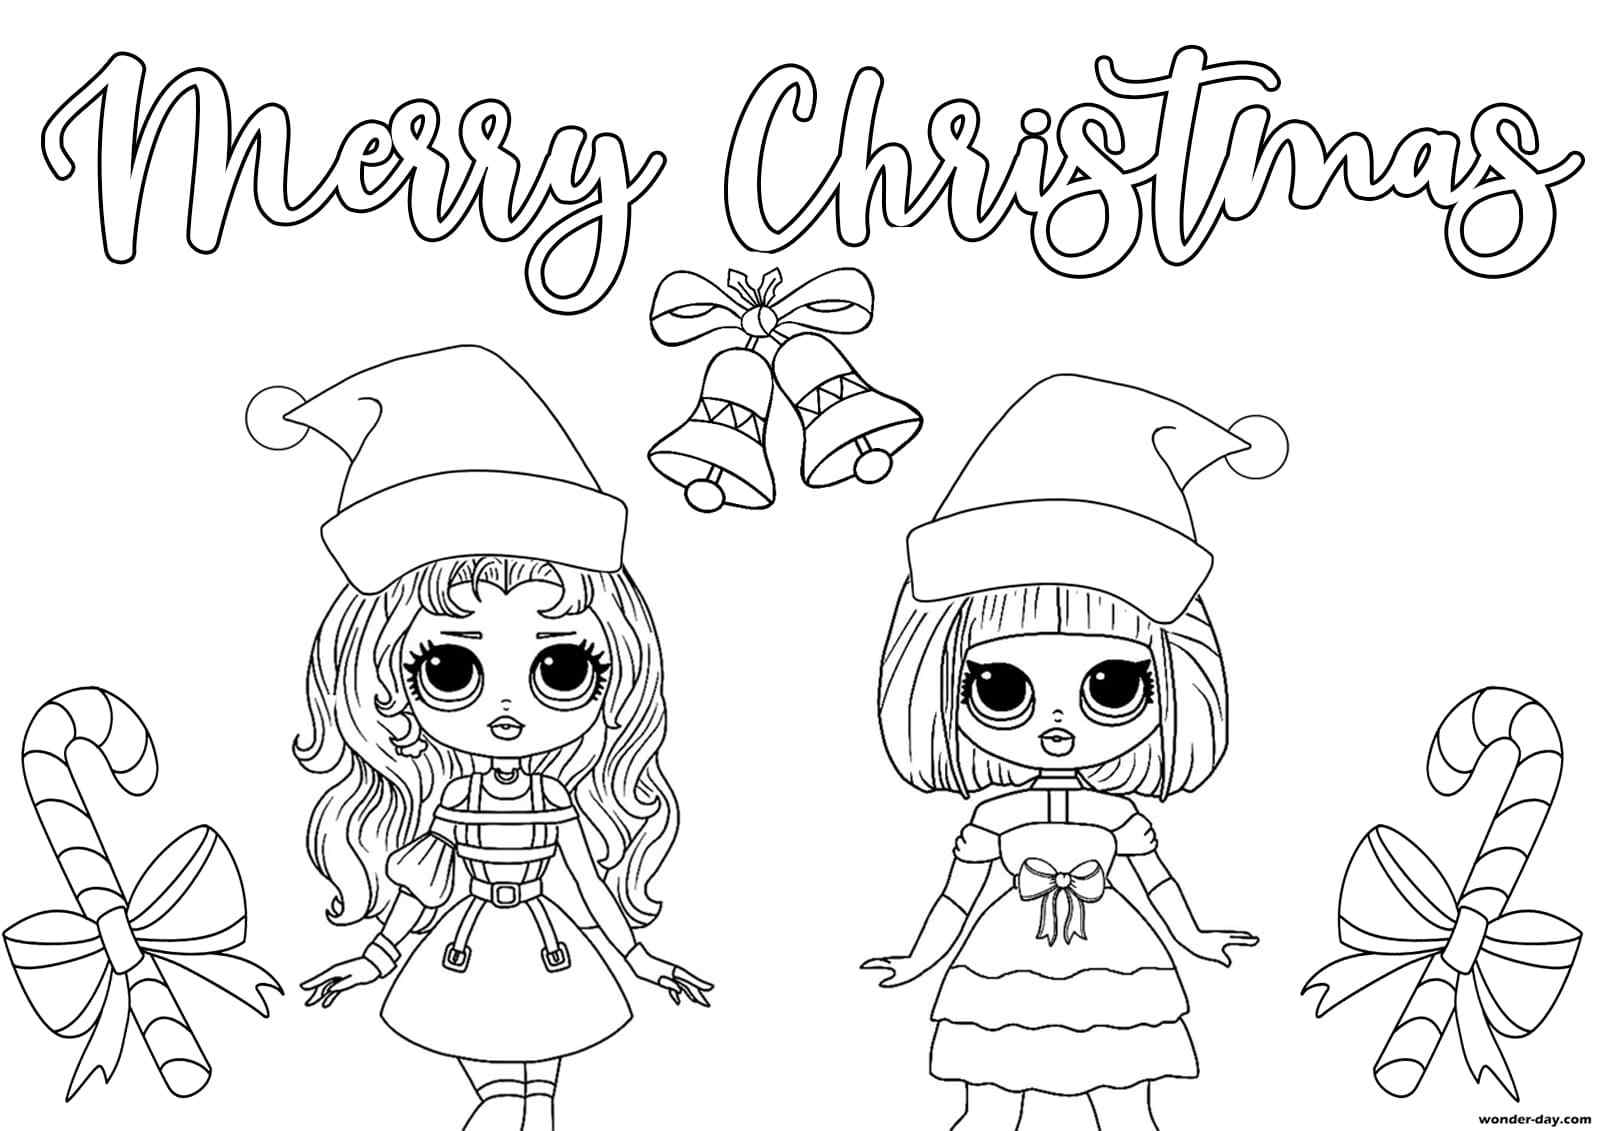 Dolls LOL OMG Christmas Coloring Page